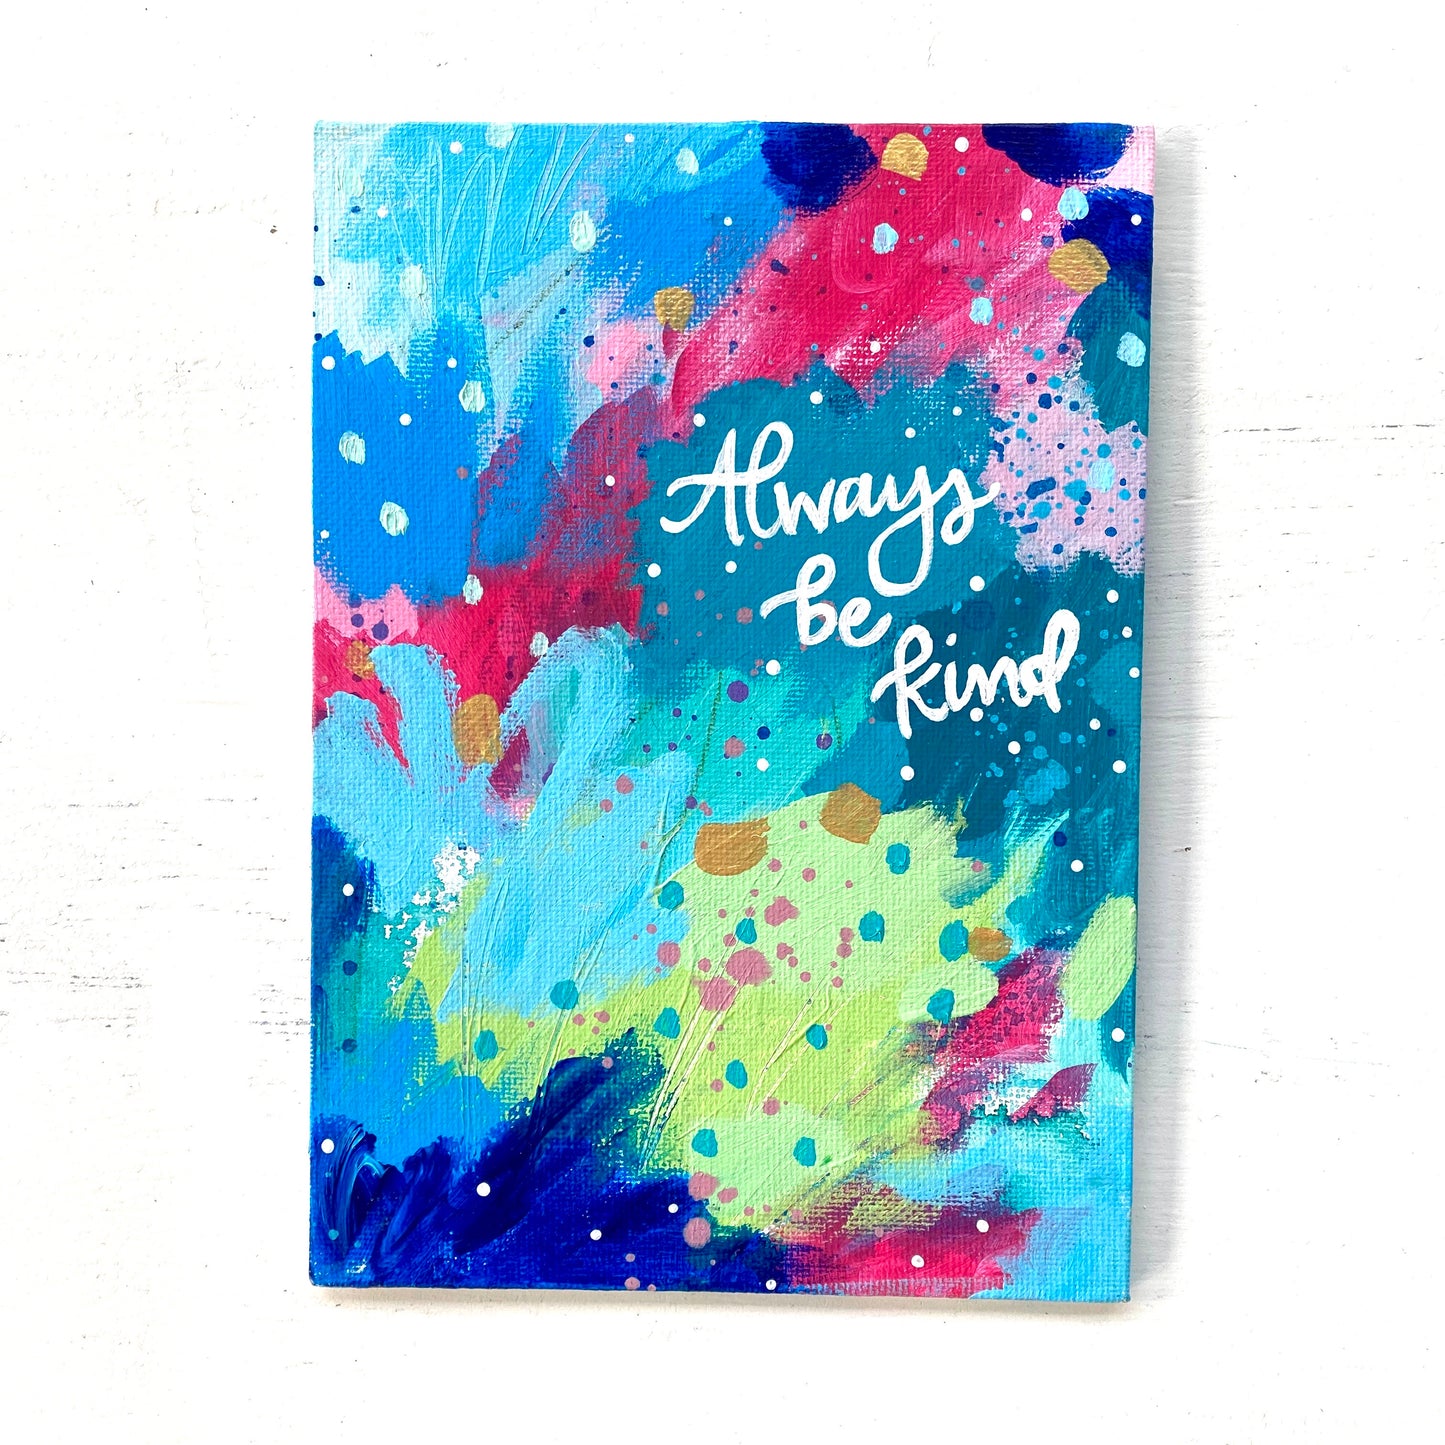 August 2020 Daily Painting Day 30 “Always be Kind” 5x7 inch original